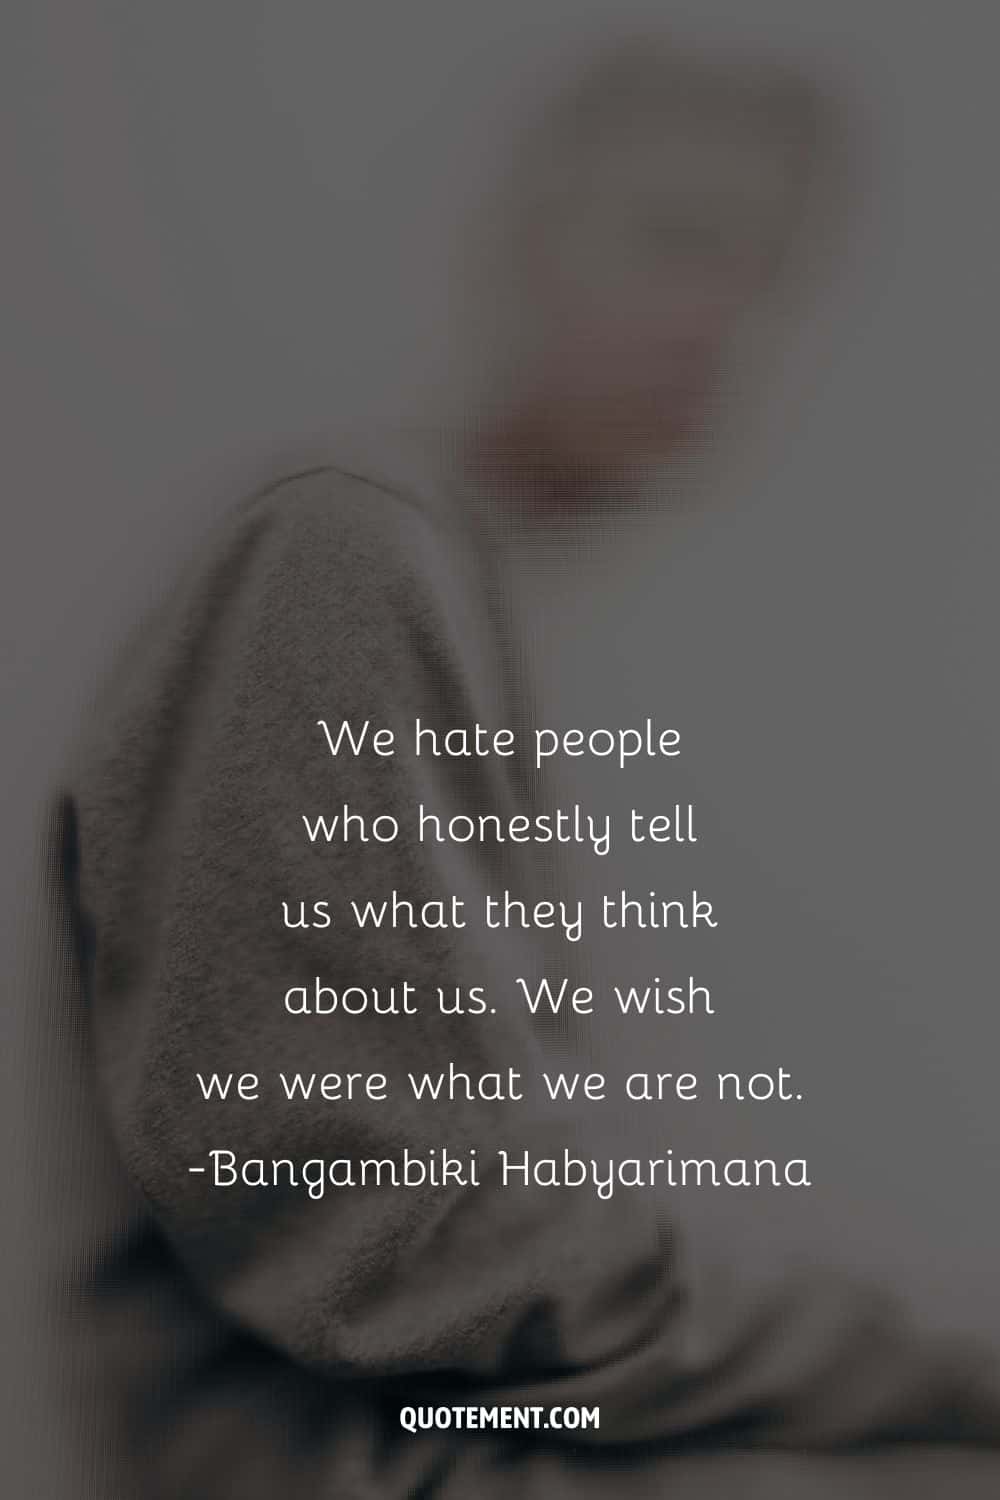 We hate people who honestly tell us what they think about us